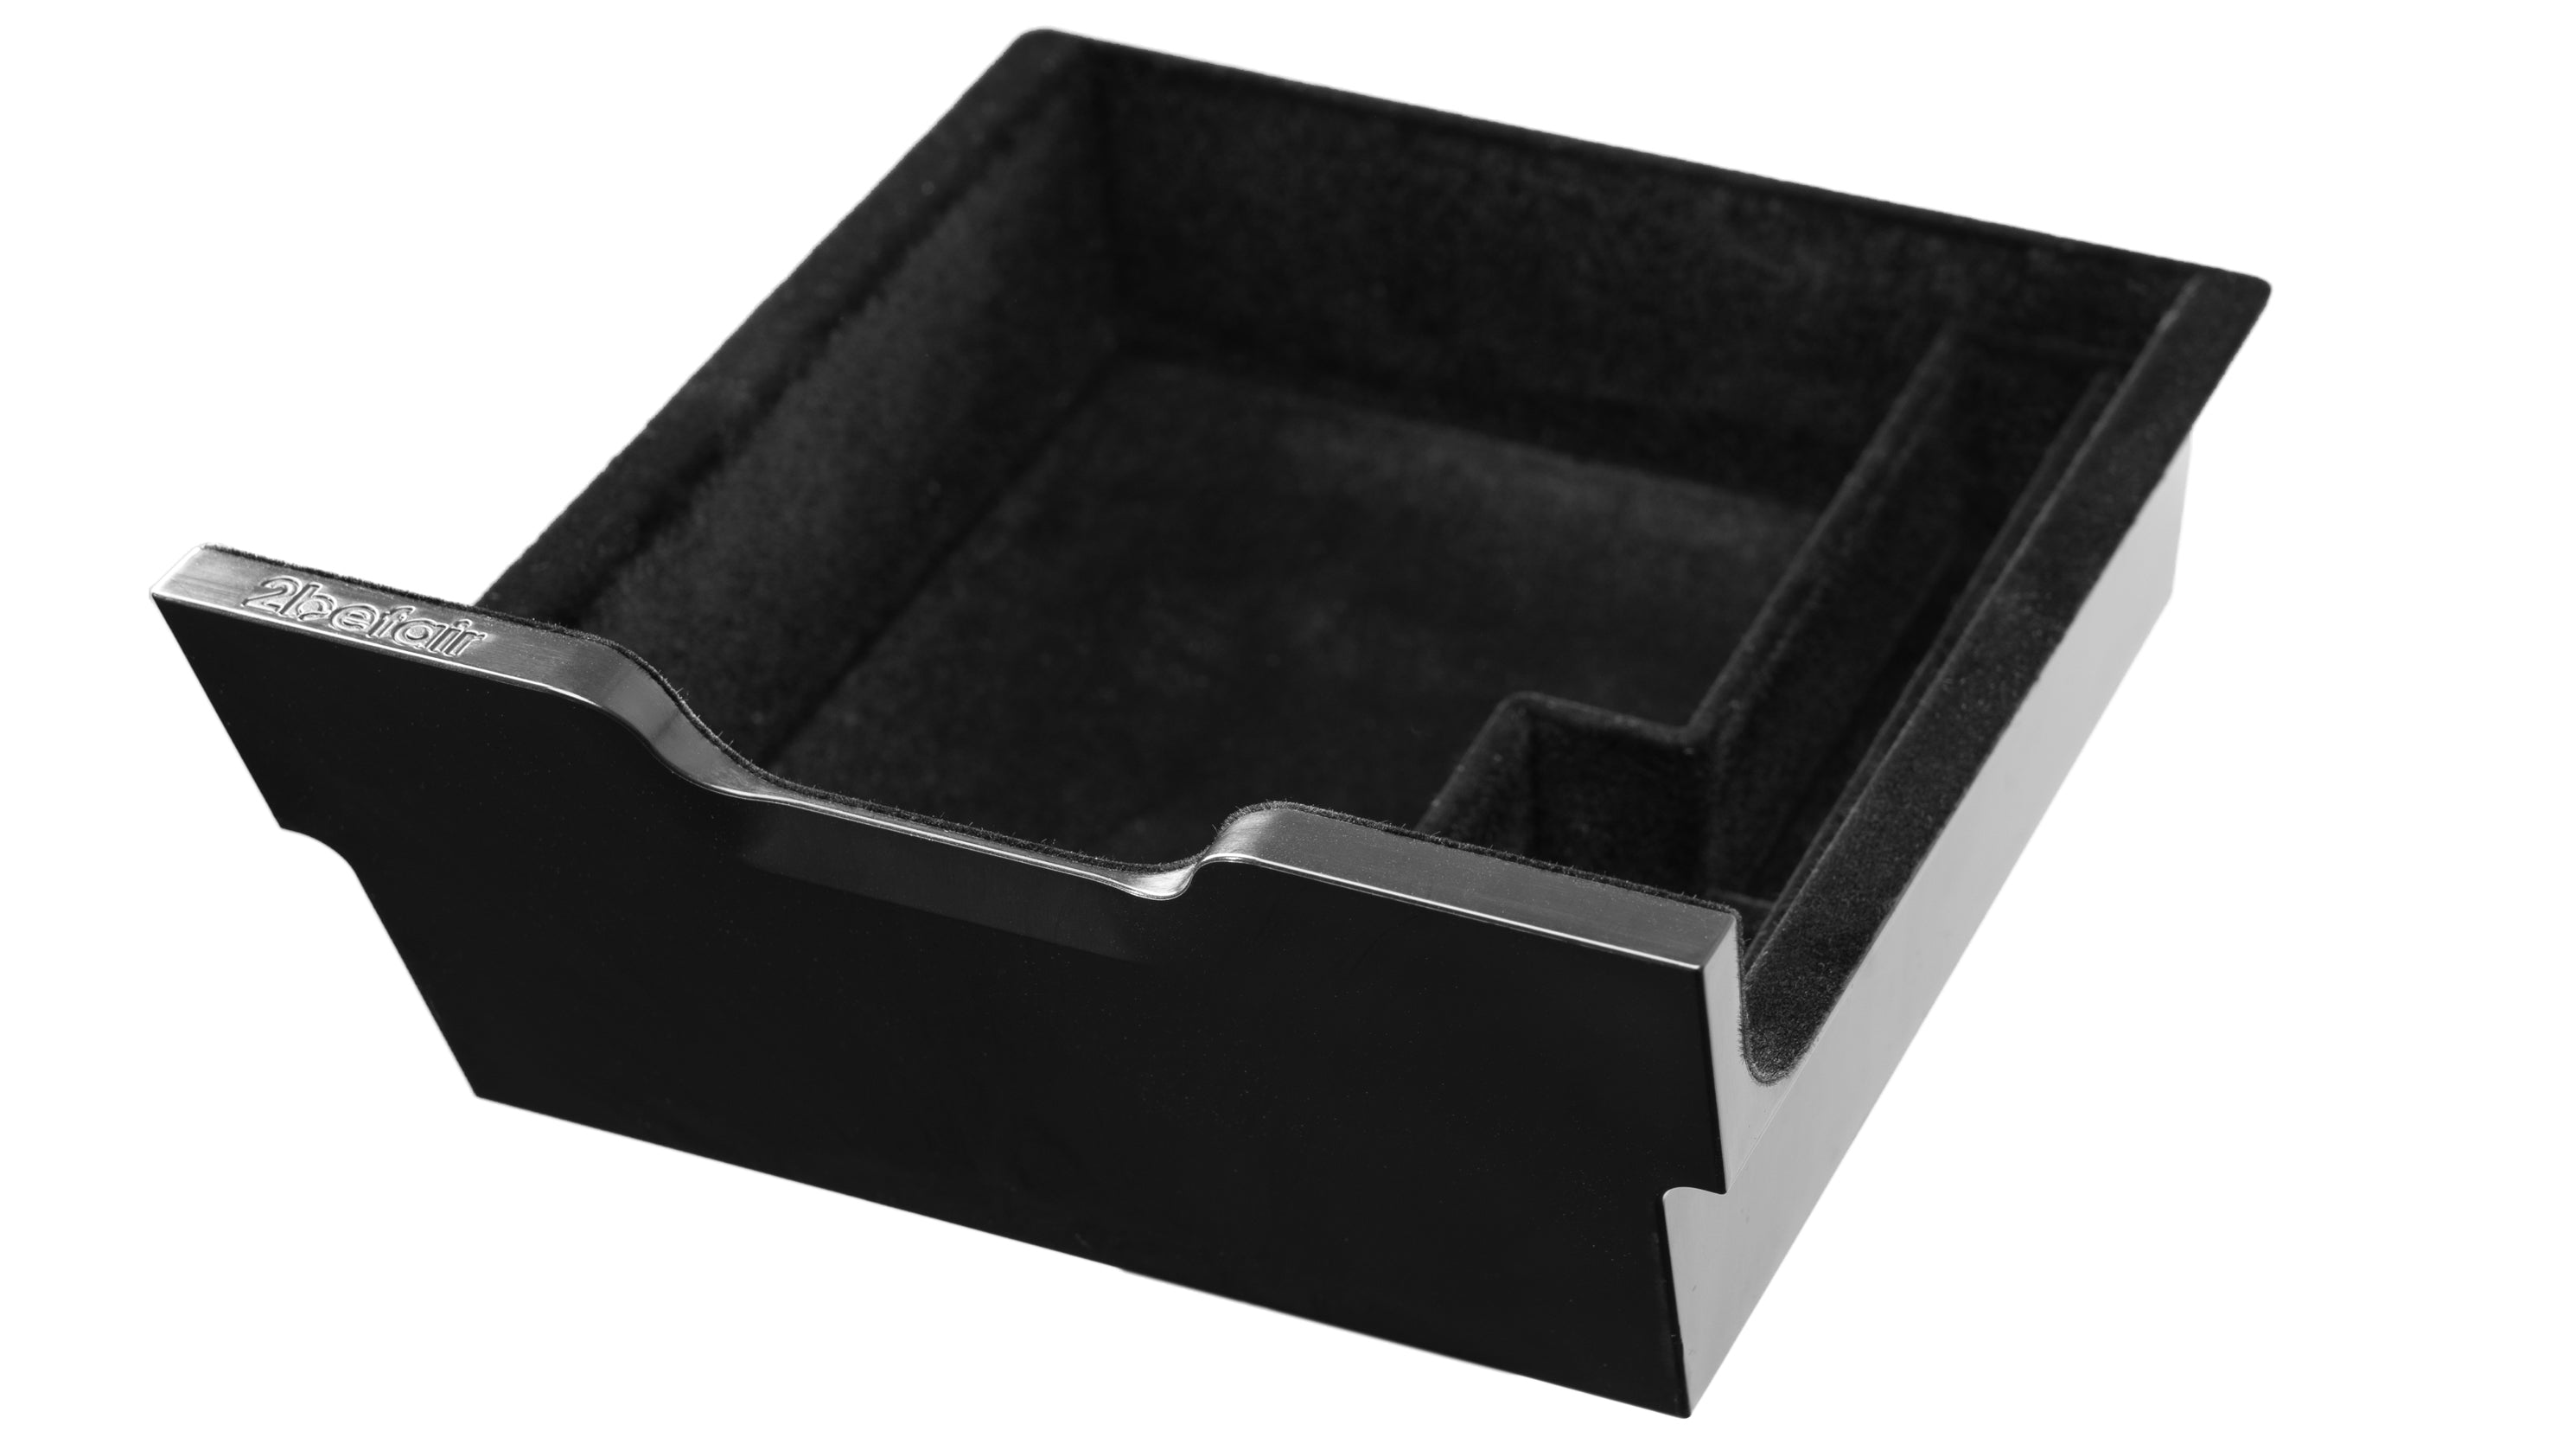 2befair organizer box for the center console of the Tesla Model 3